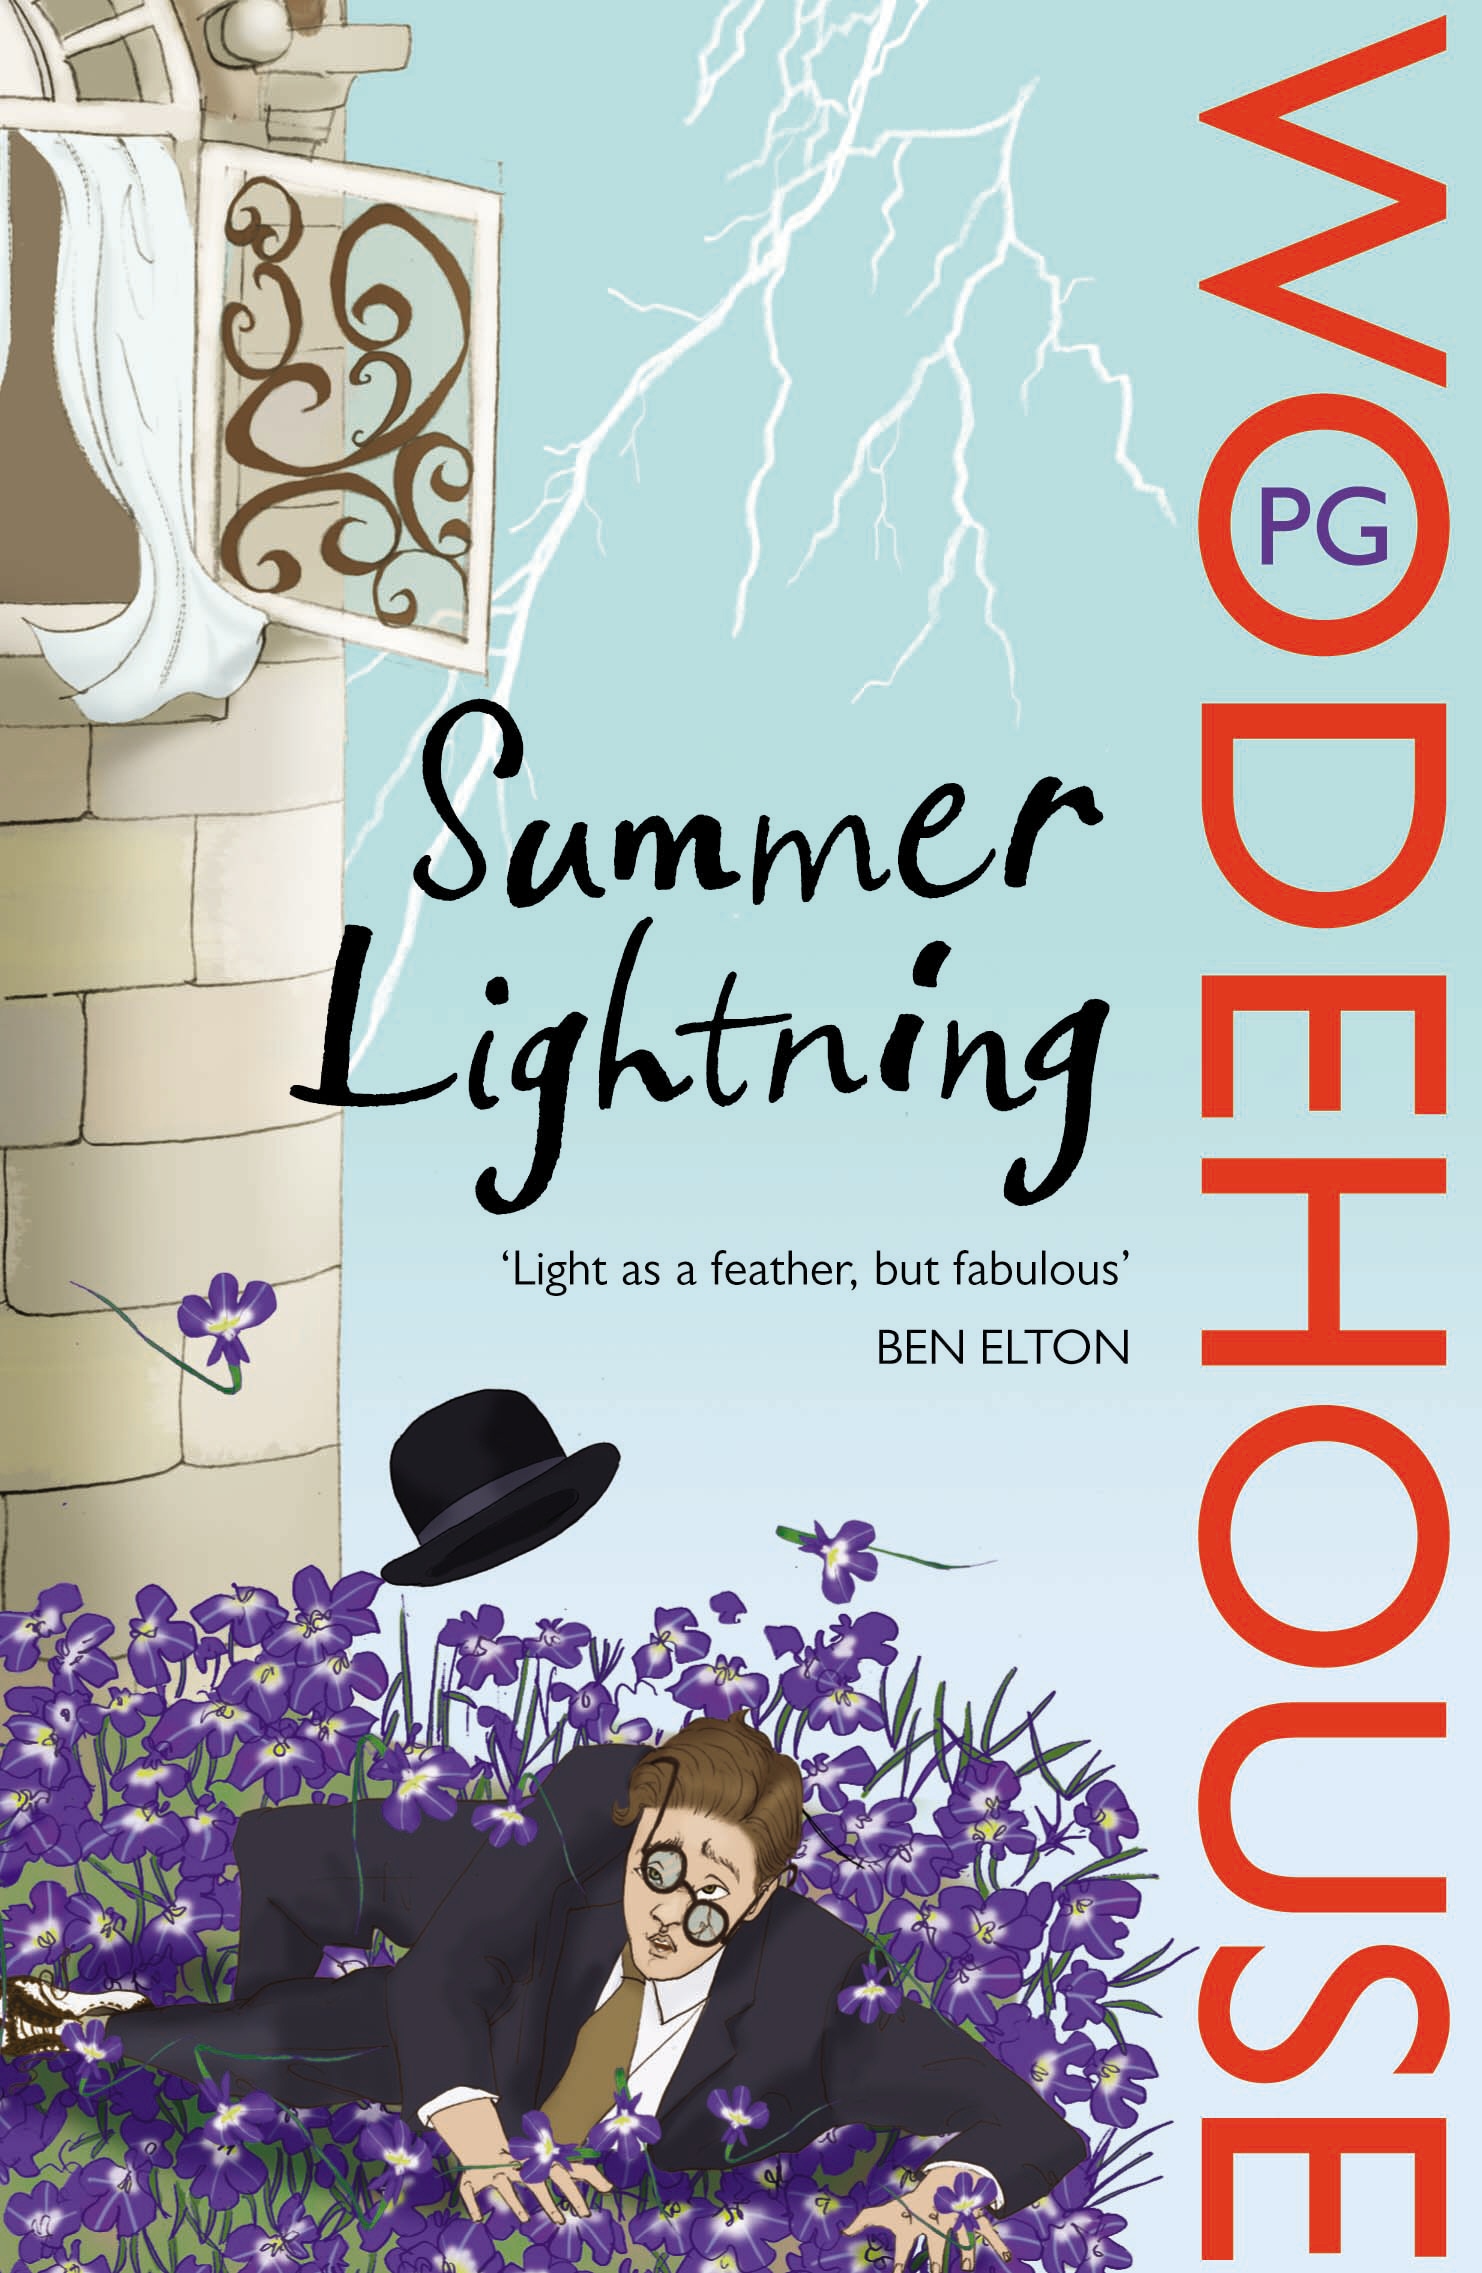 Book “Summer Lightning” by P.G. Wodehouse — May 1, 2008